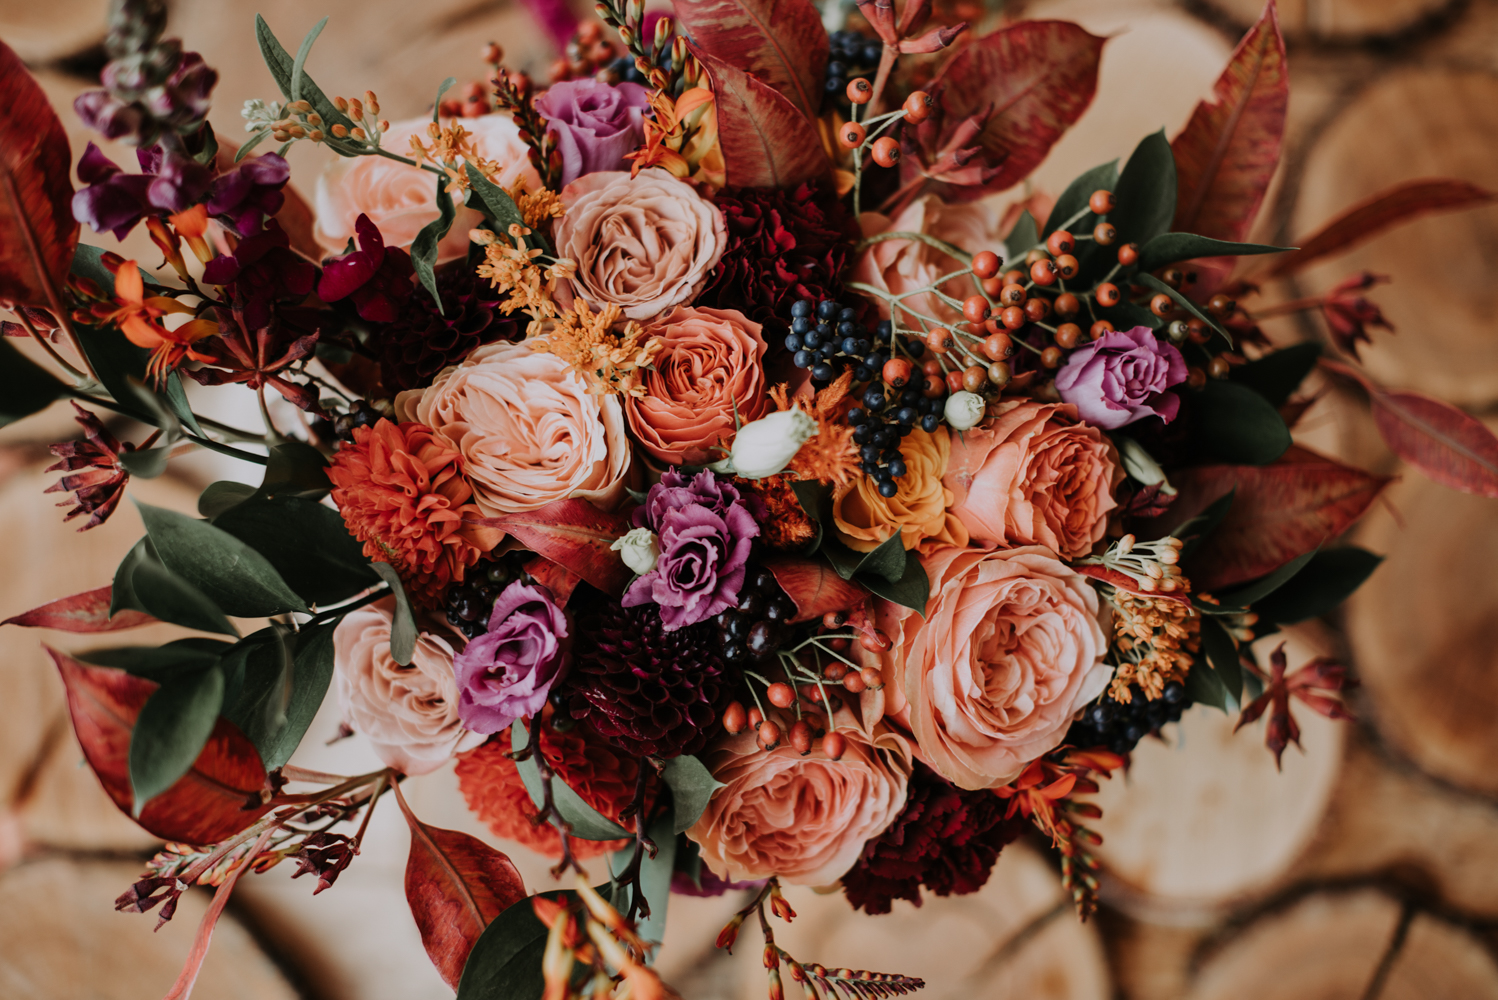 The bride made up her bouquet herself using blooms of fall colors and greenery